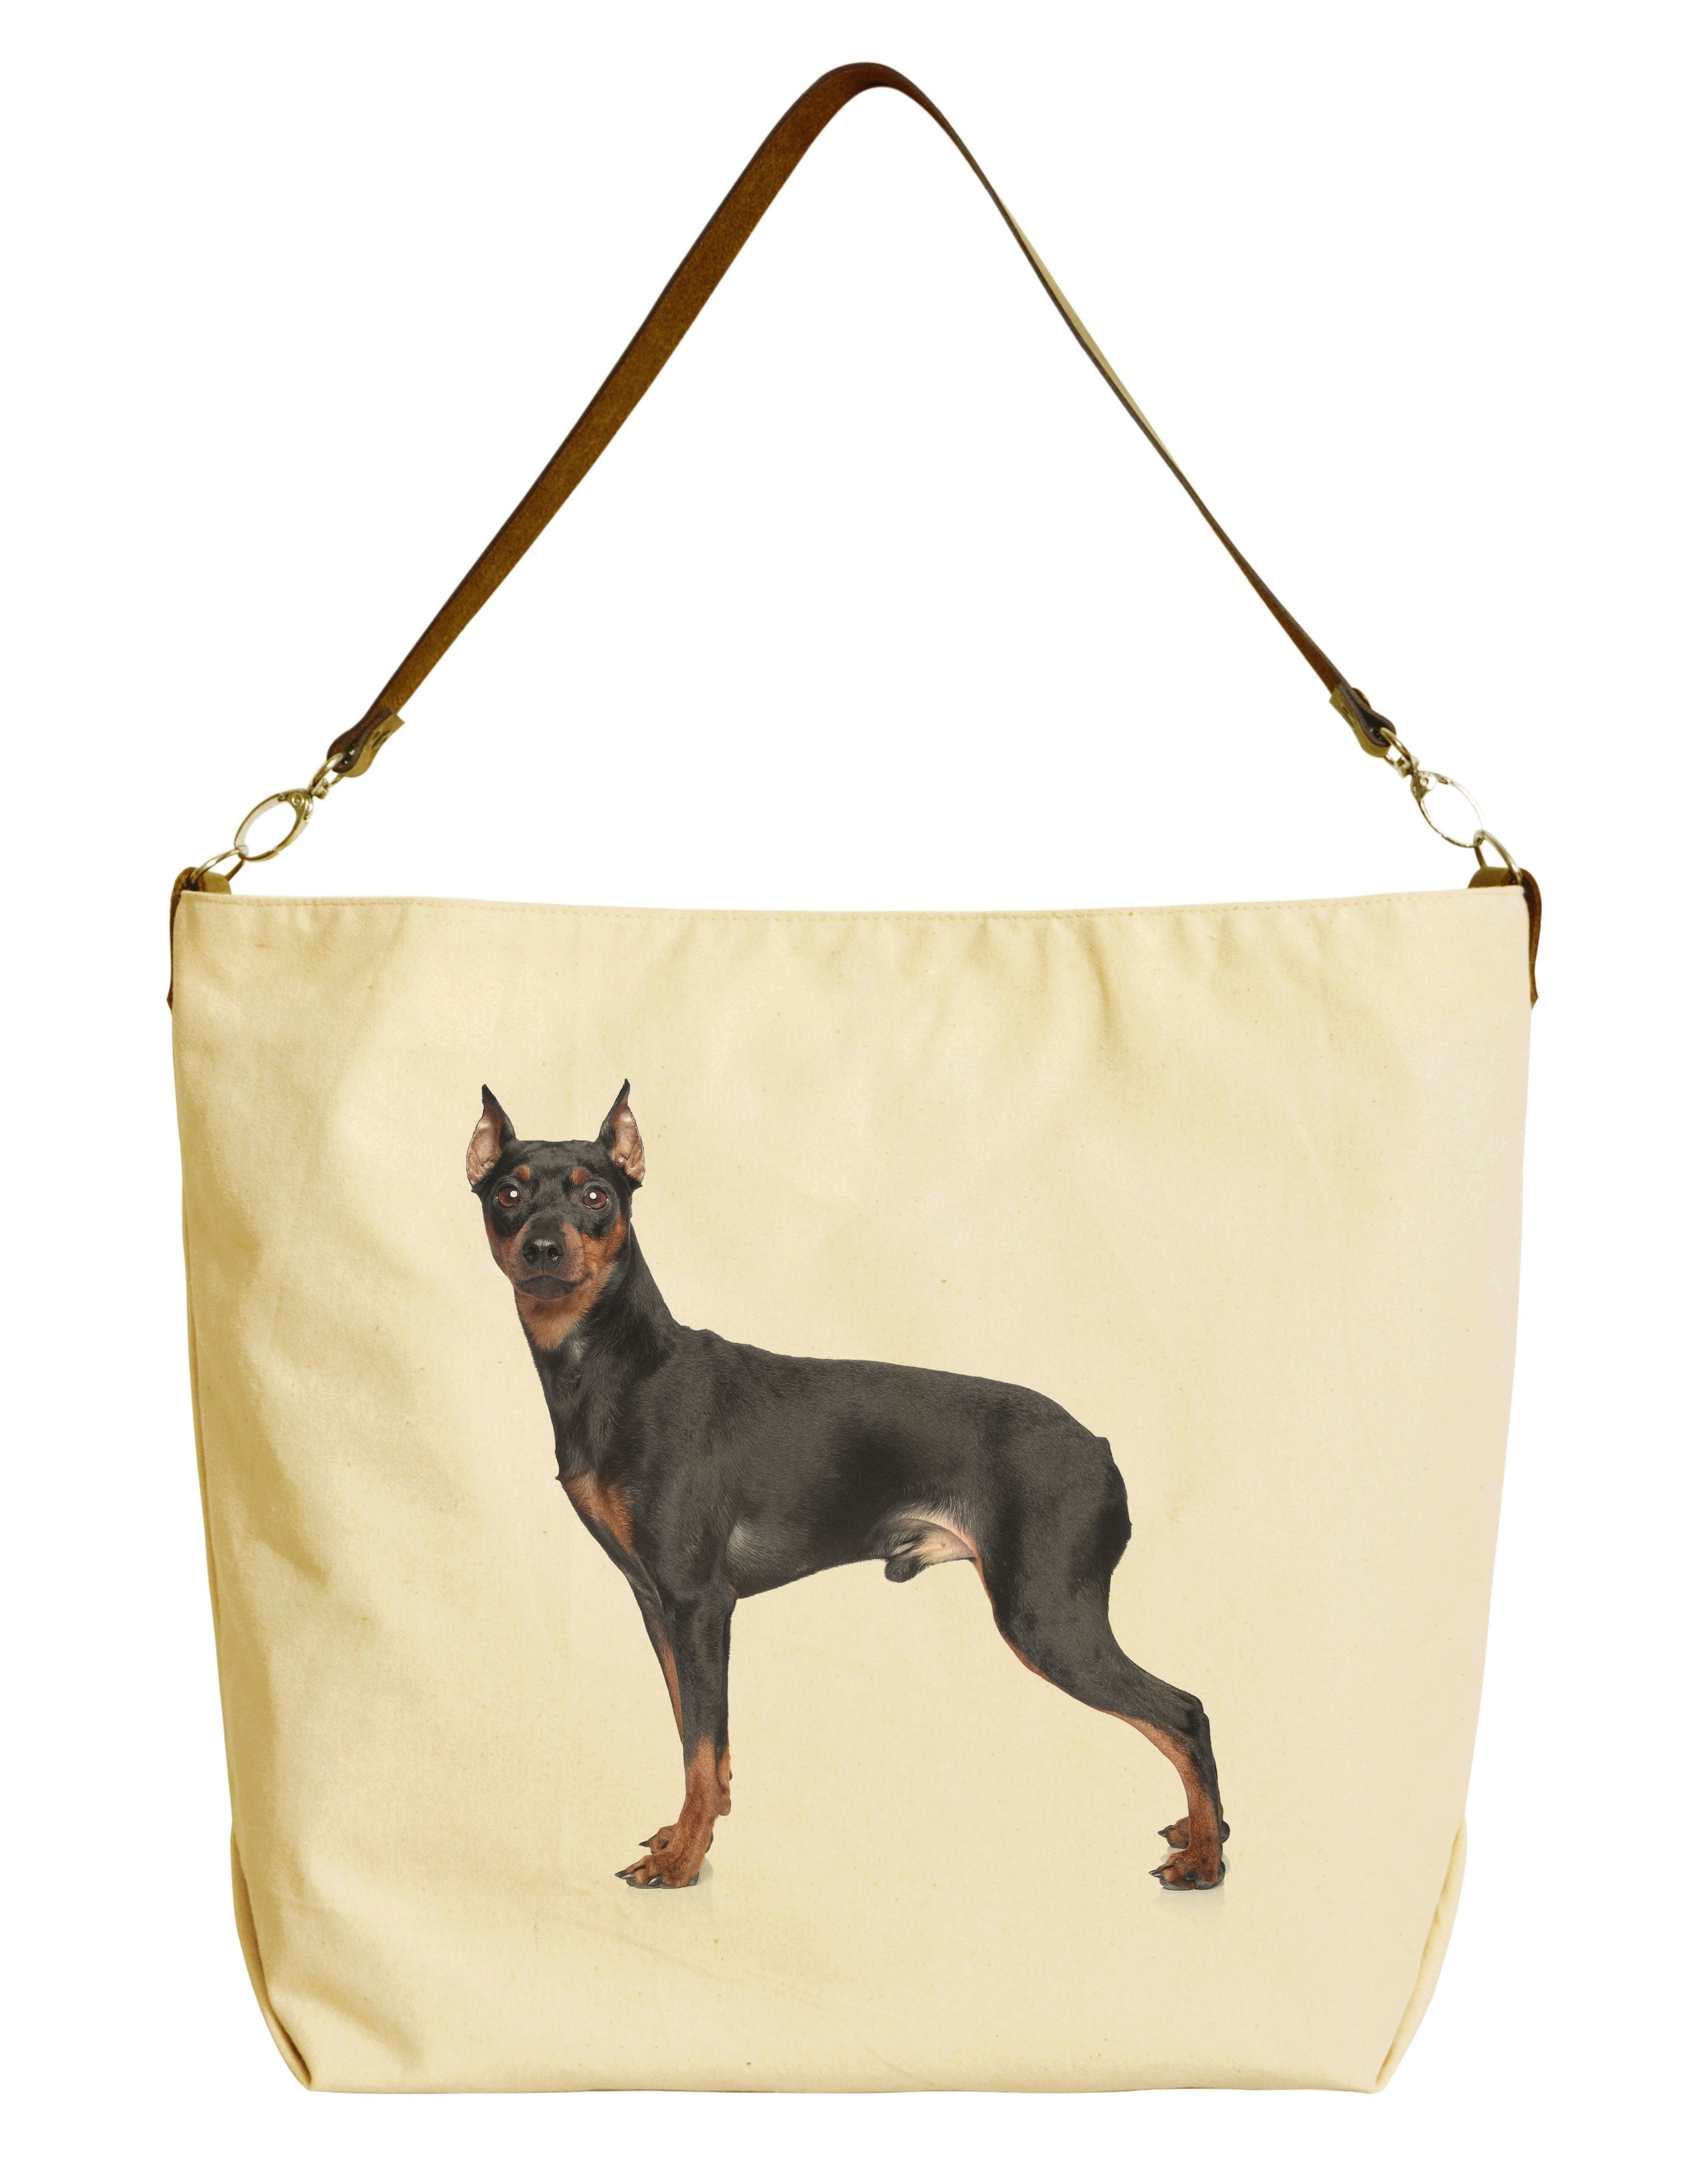 MINIATURE PINSCHER embroidered tote bag ANY COLOR 